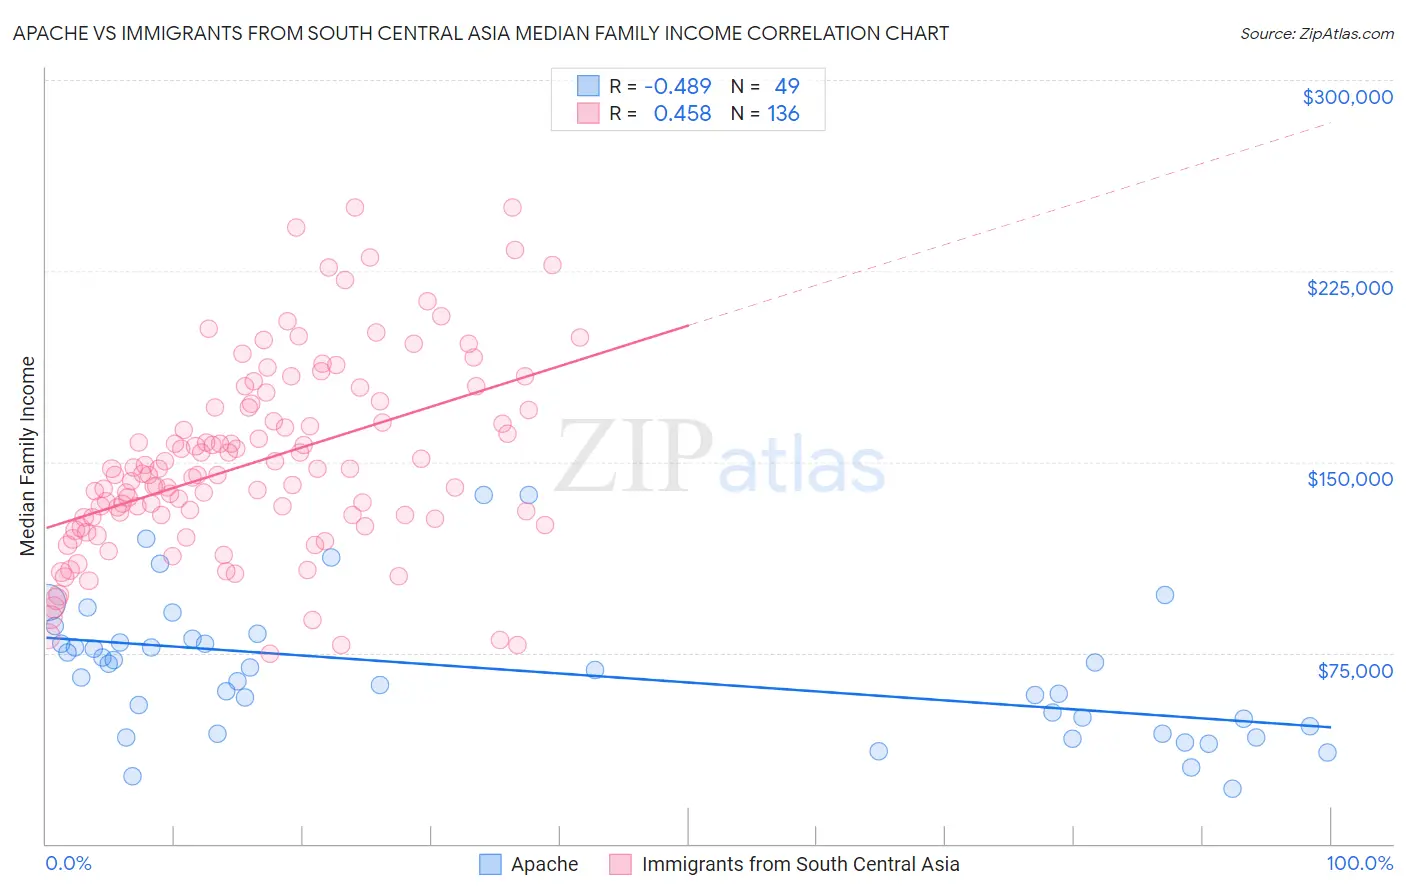 Apache vs Immigrants from South Central Asia Median Family Income